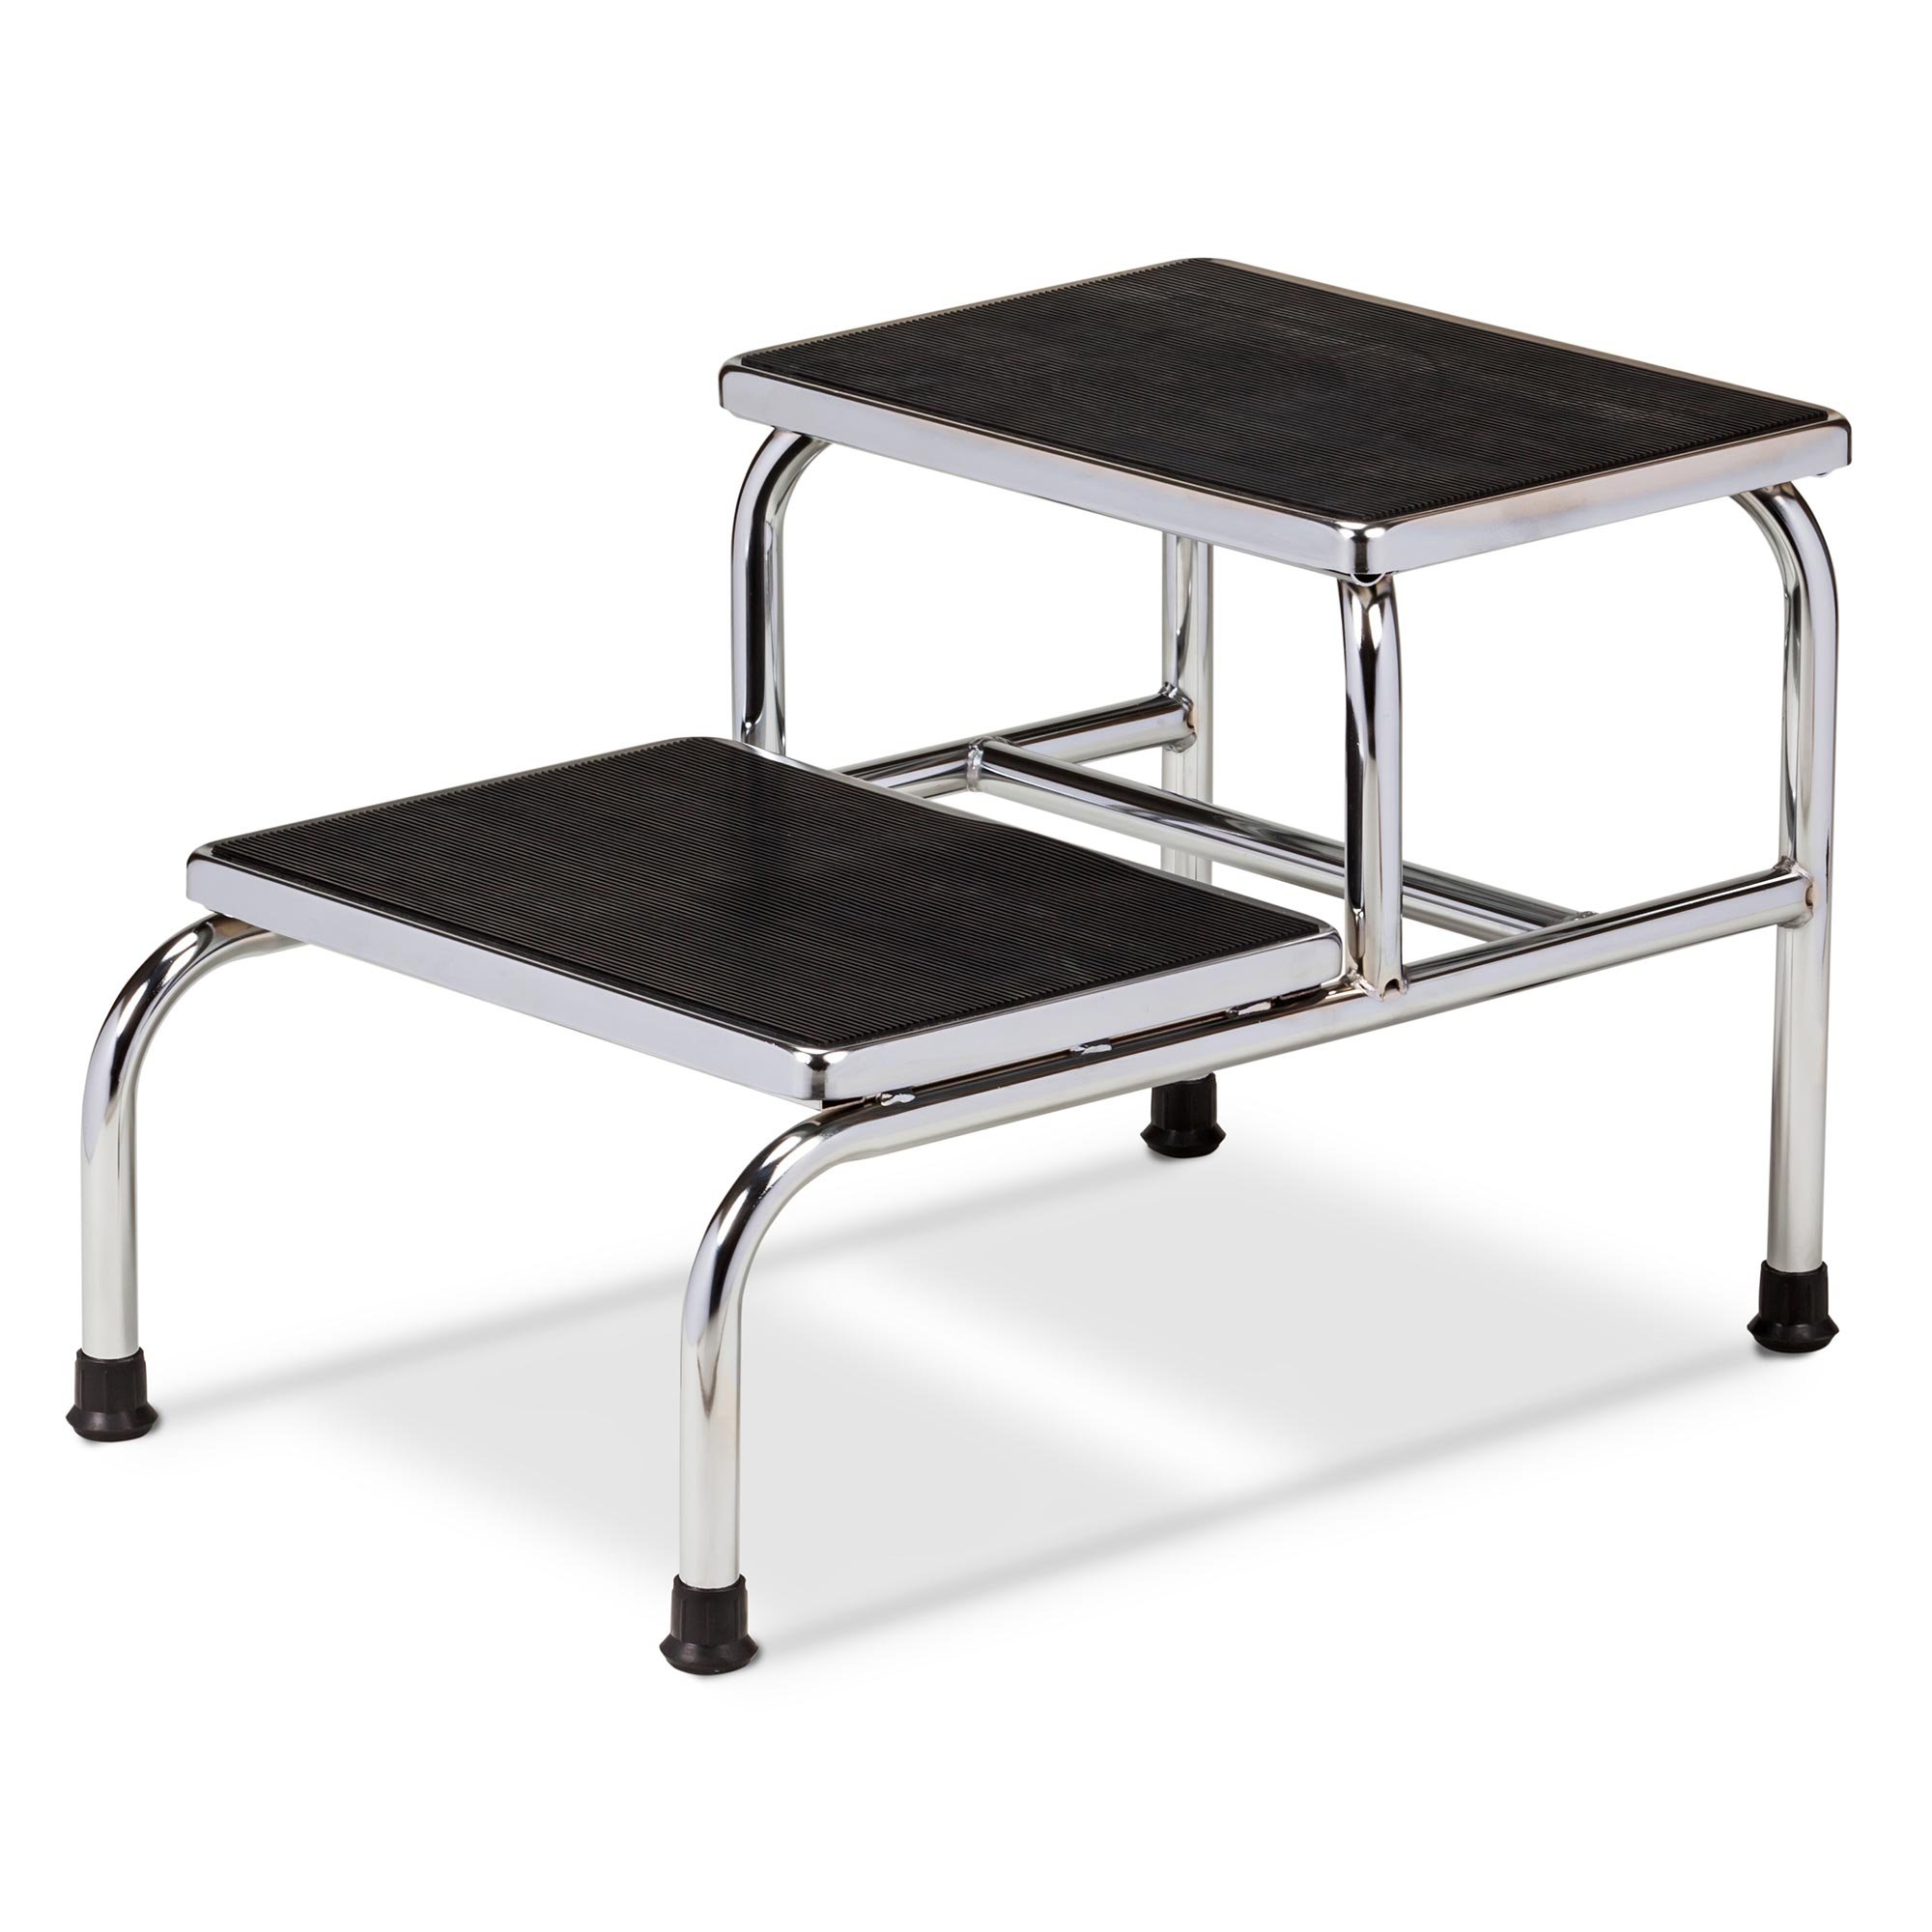 Double Stepper Stool